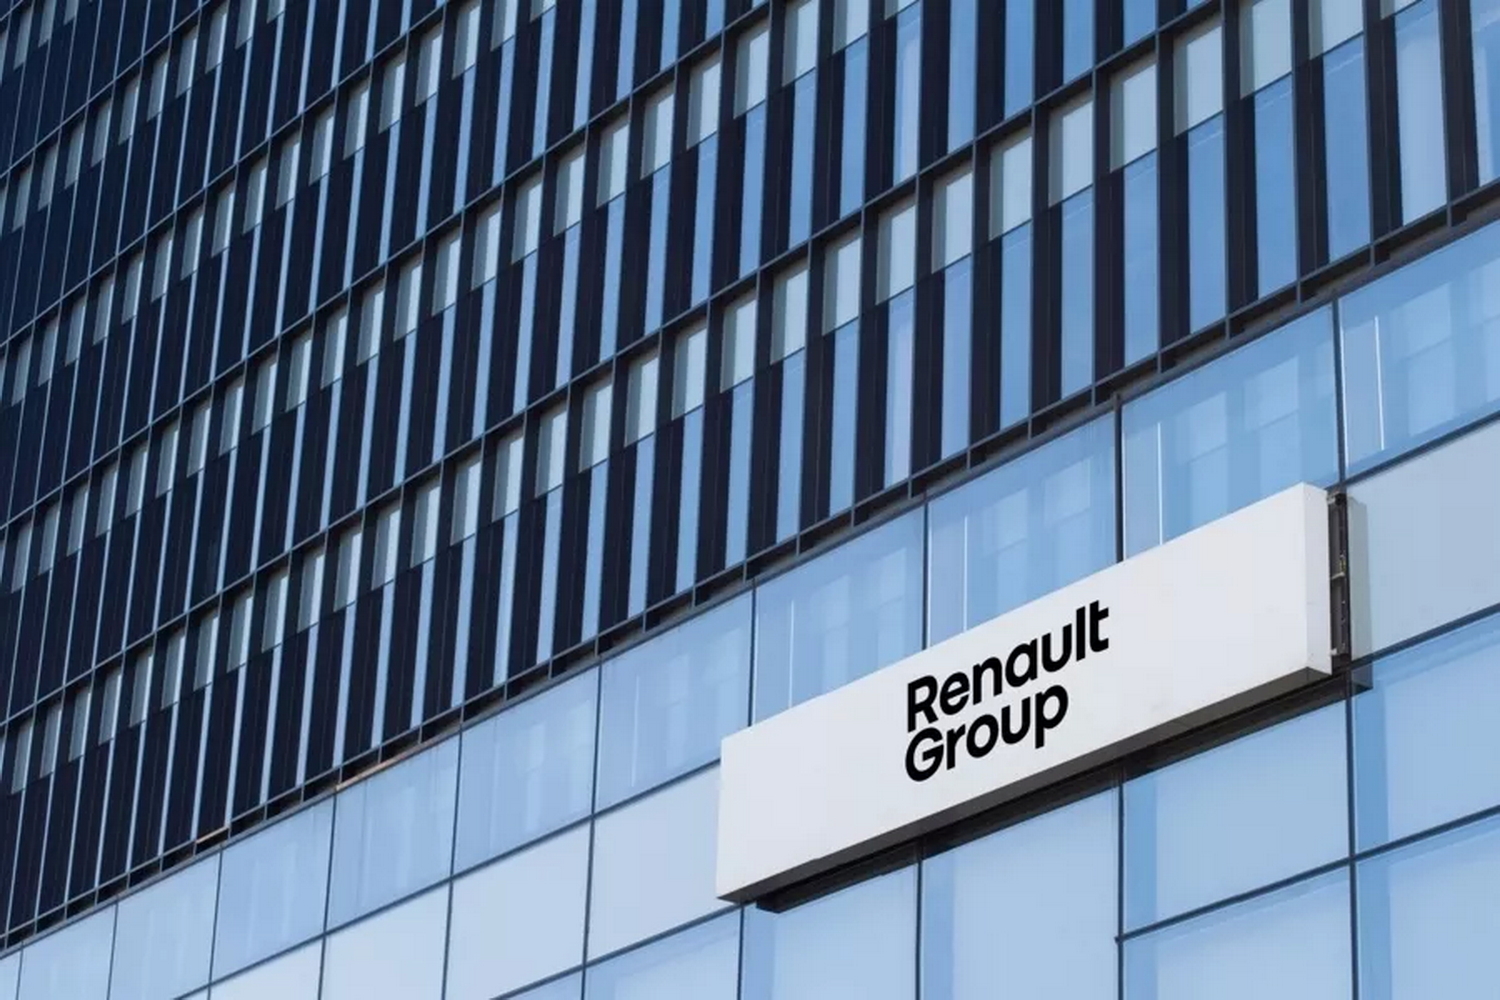 Car Industry News | Record month for Renault Group | CompleteCar.ie